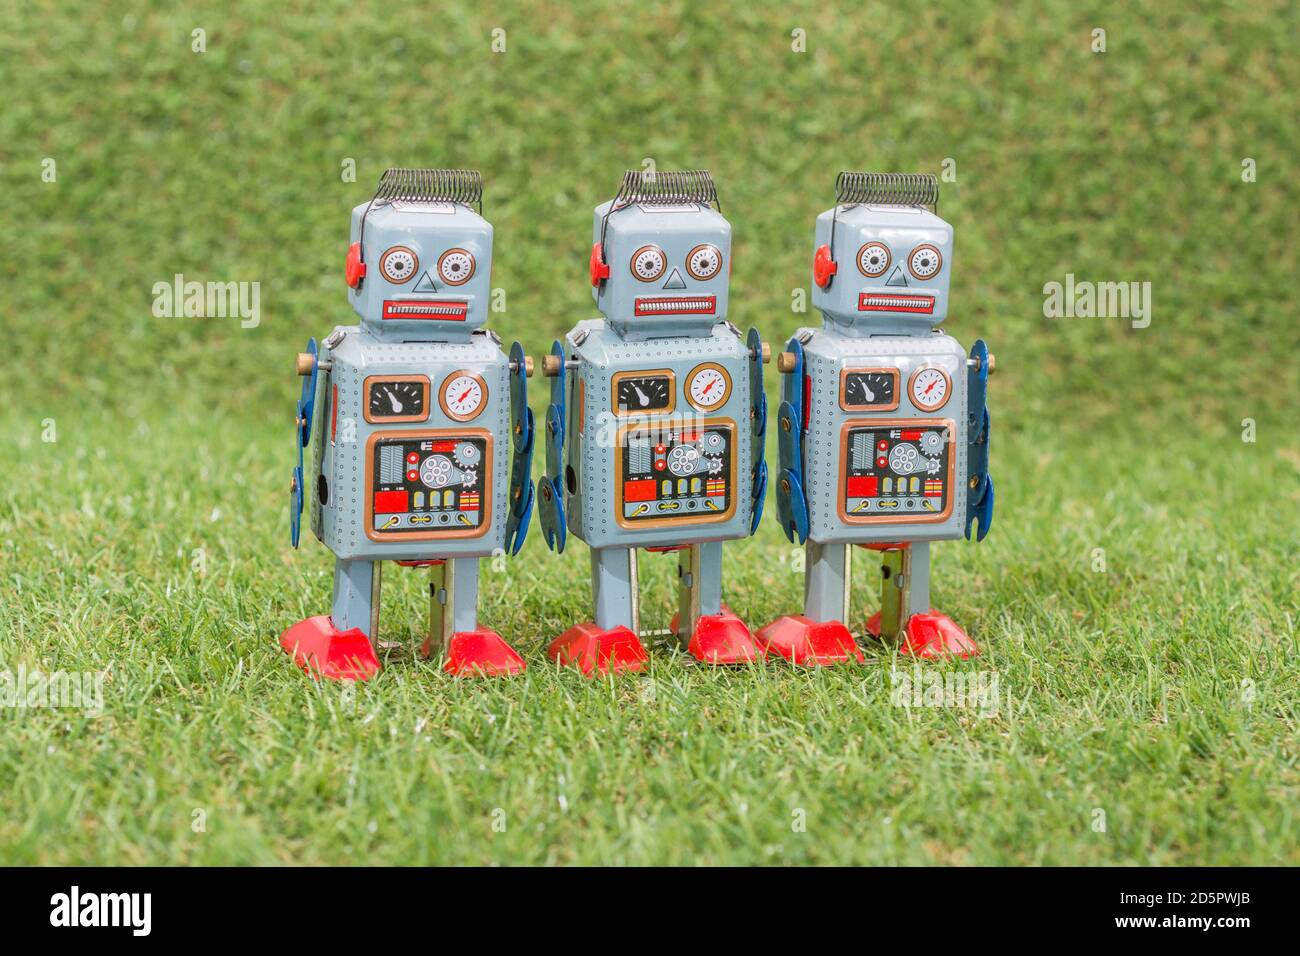 Wind-up clockwork toy robot on fake grass. For troll farm, Russian bots meddling in US American election, Russia trolls & bots, trolling, advances AI Stock Photo